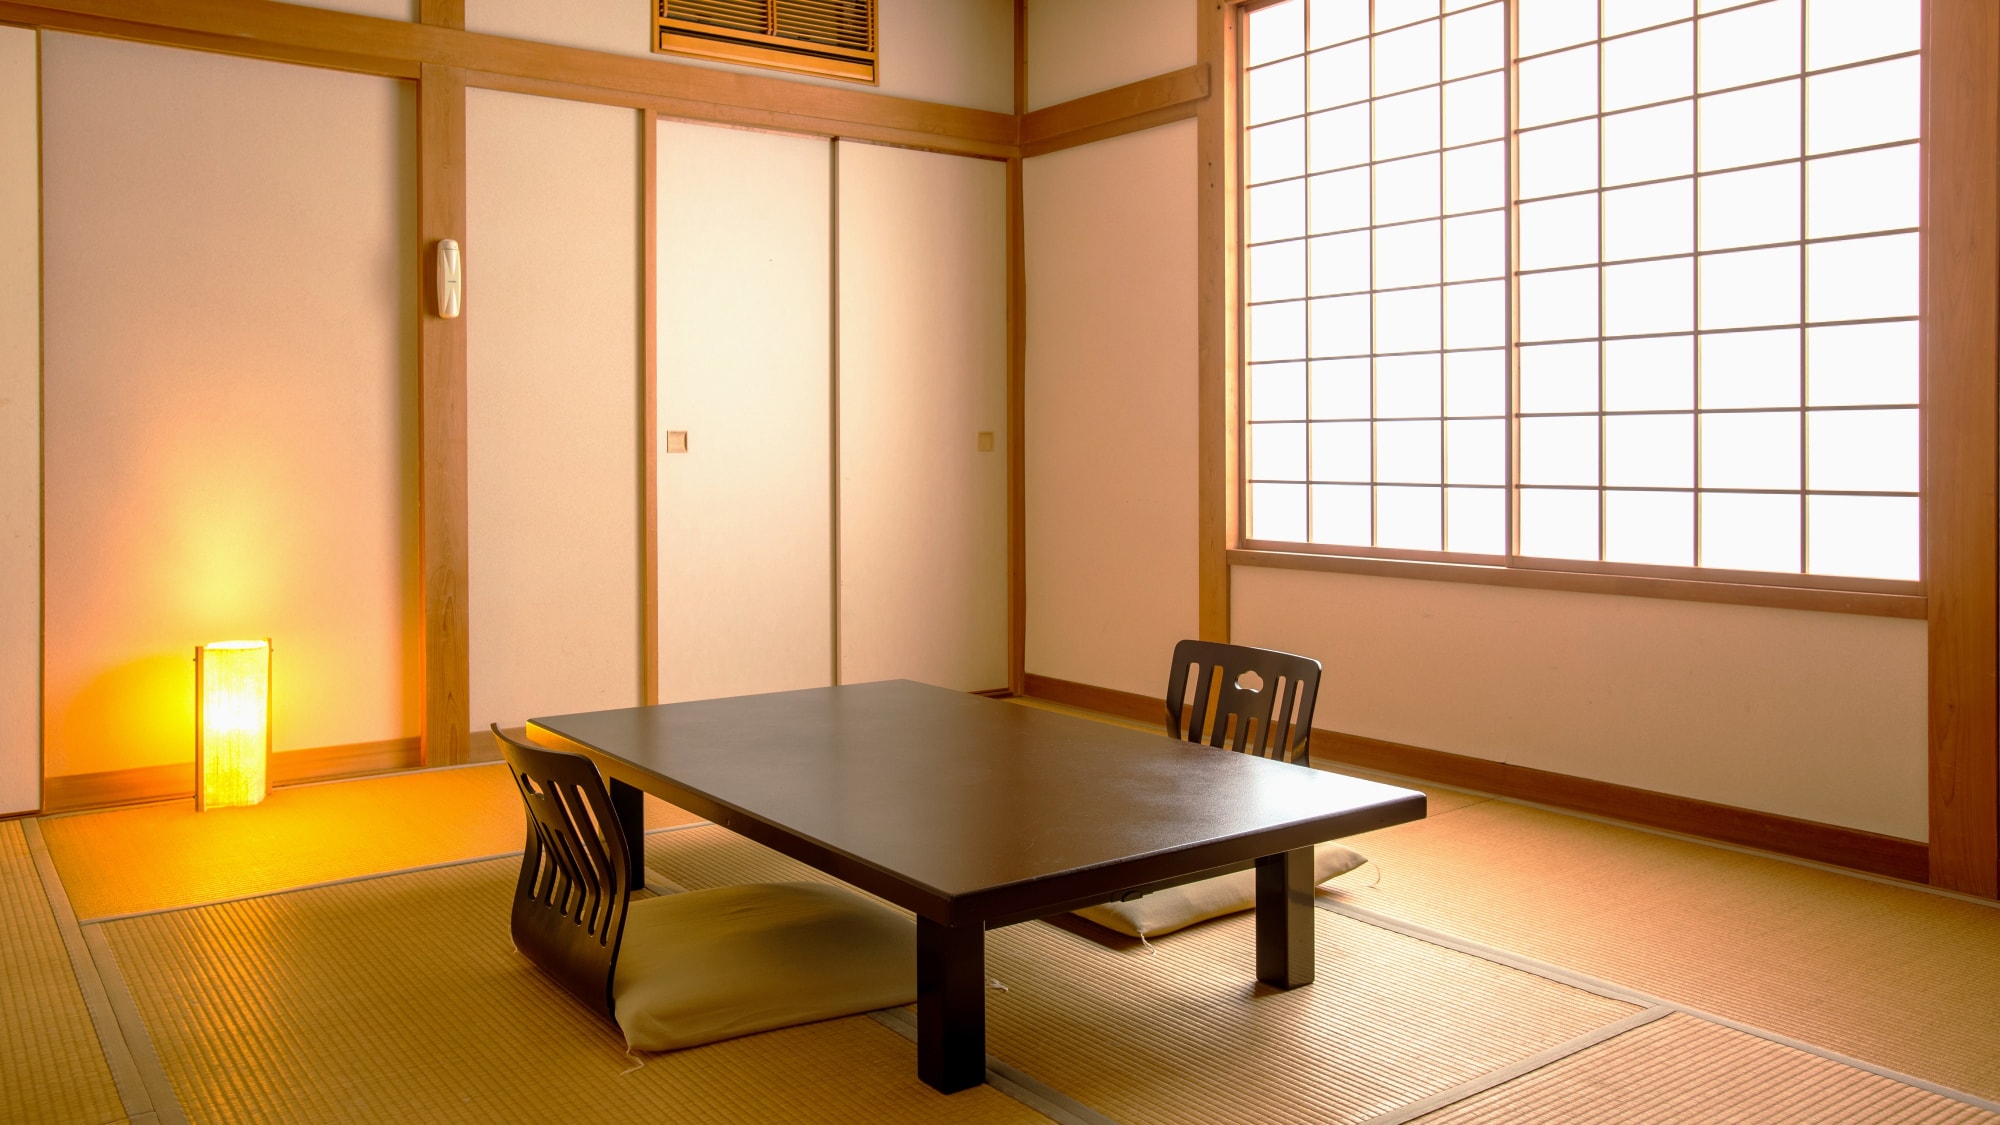 Japanese-style room with 10 tatami mats